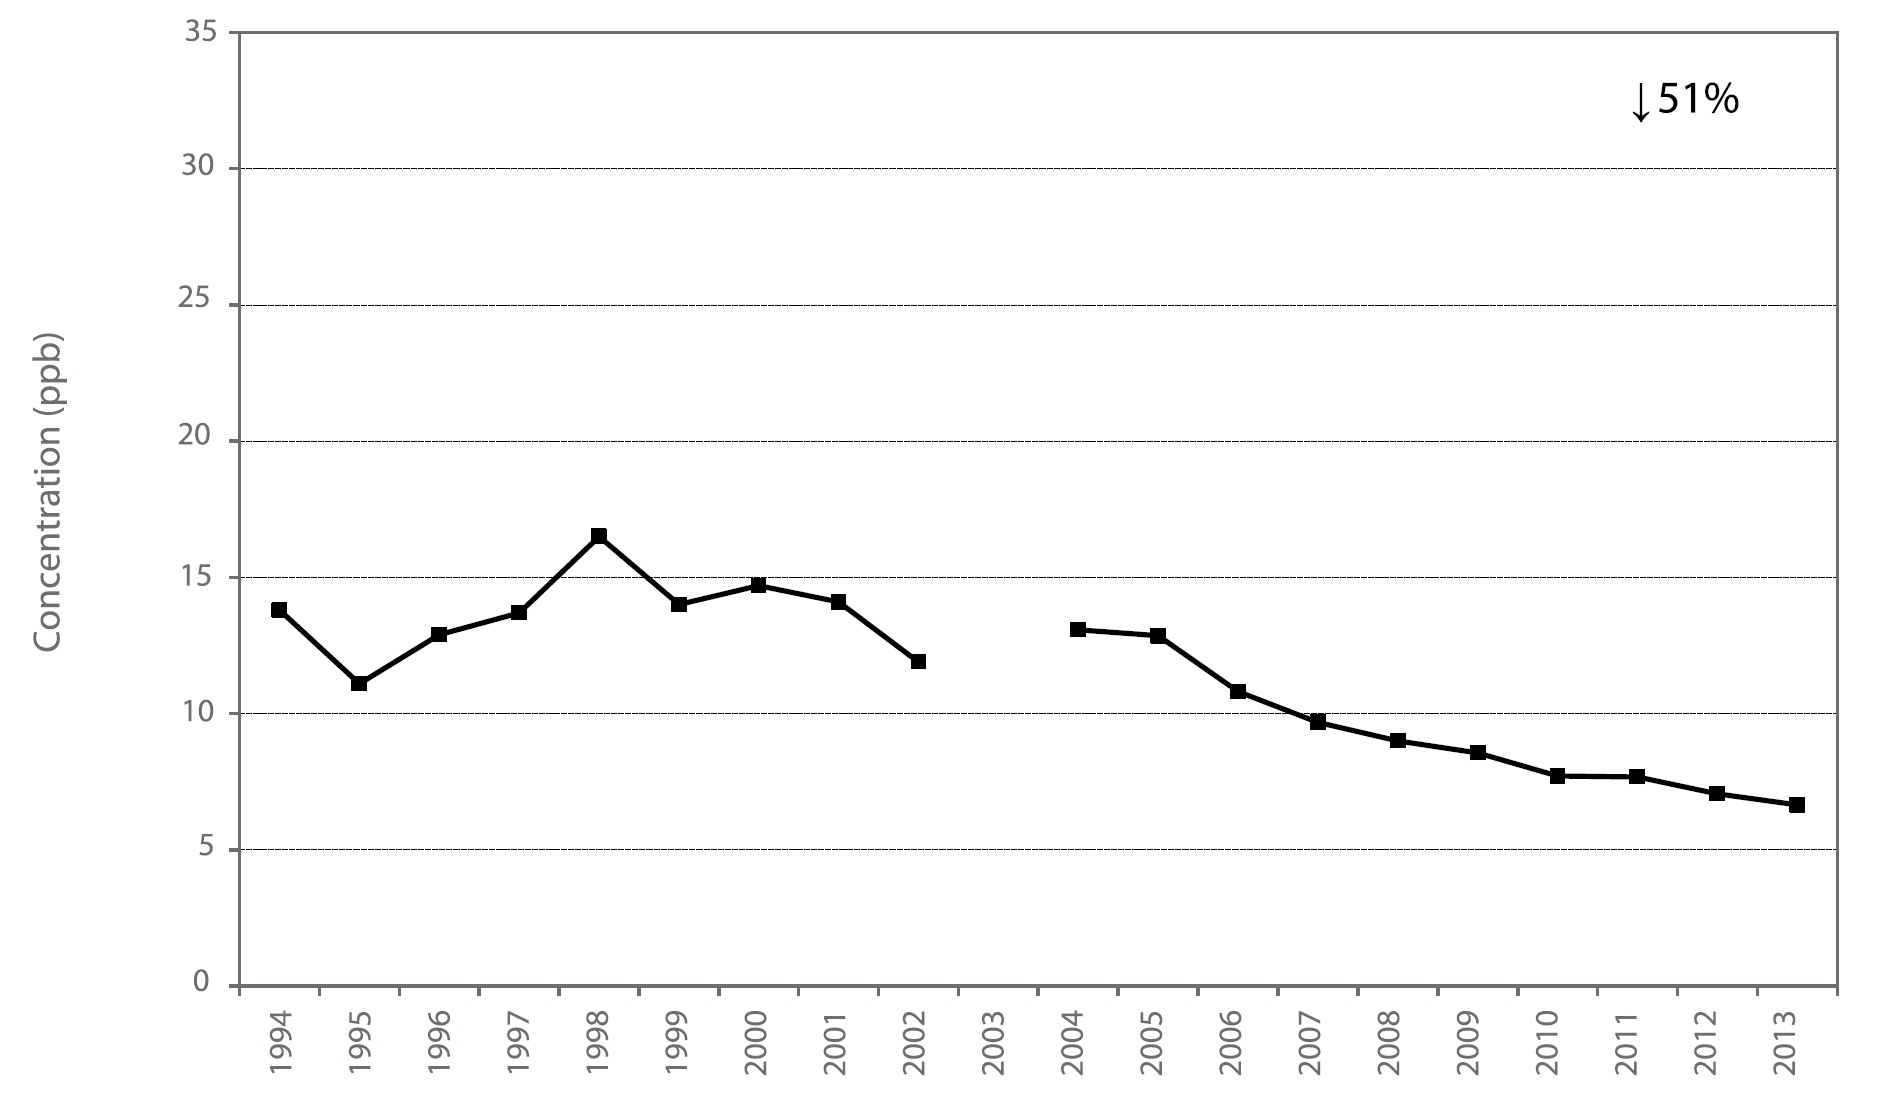 Figure A30 is a line chart displaying the nitrogen dioxide annual mean at Kitchener from 1994 to 2013. Over this 20-year period, nitrogen dioxide decreased 51%.